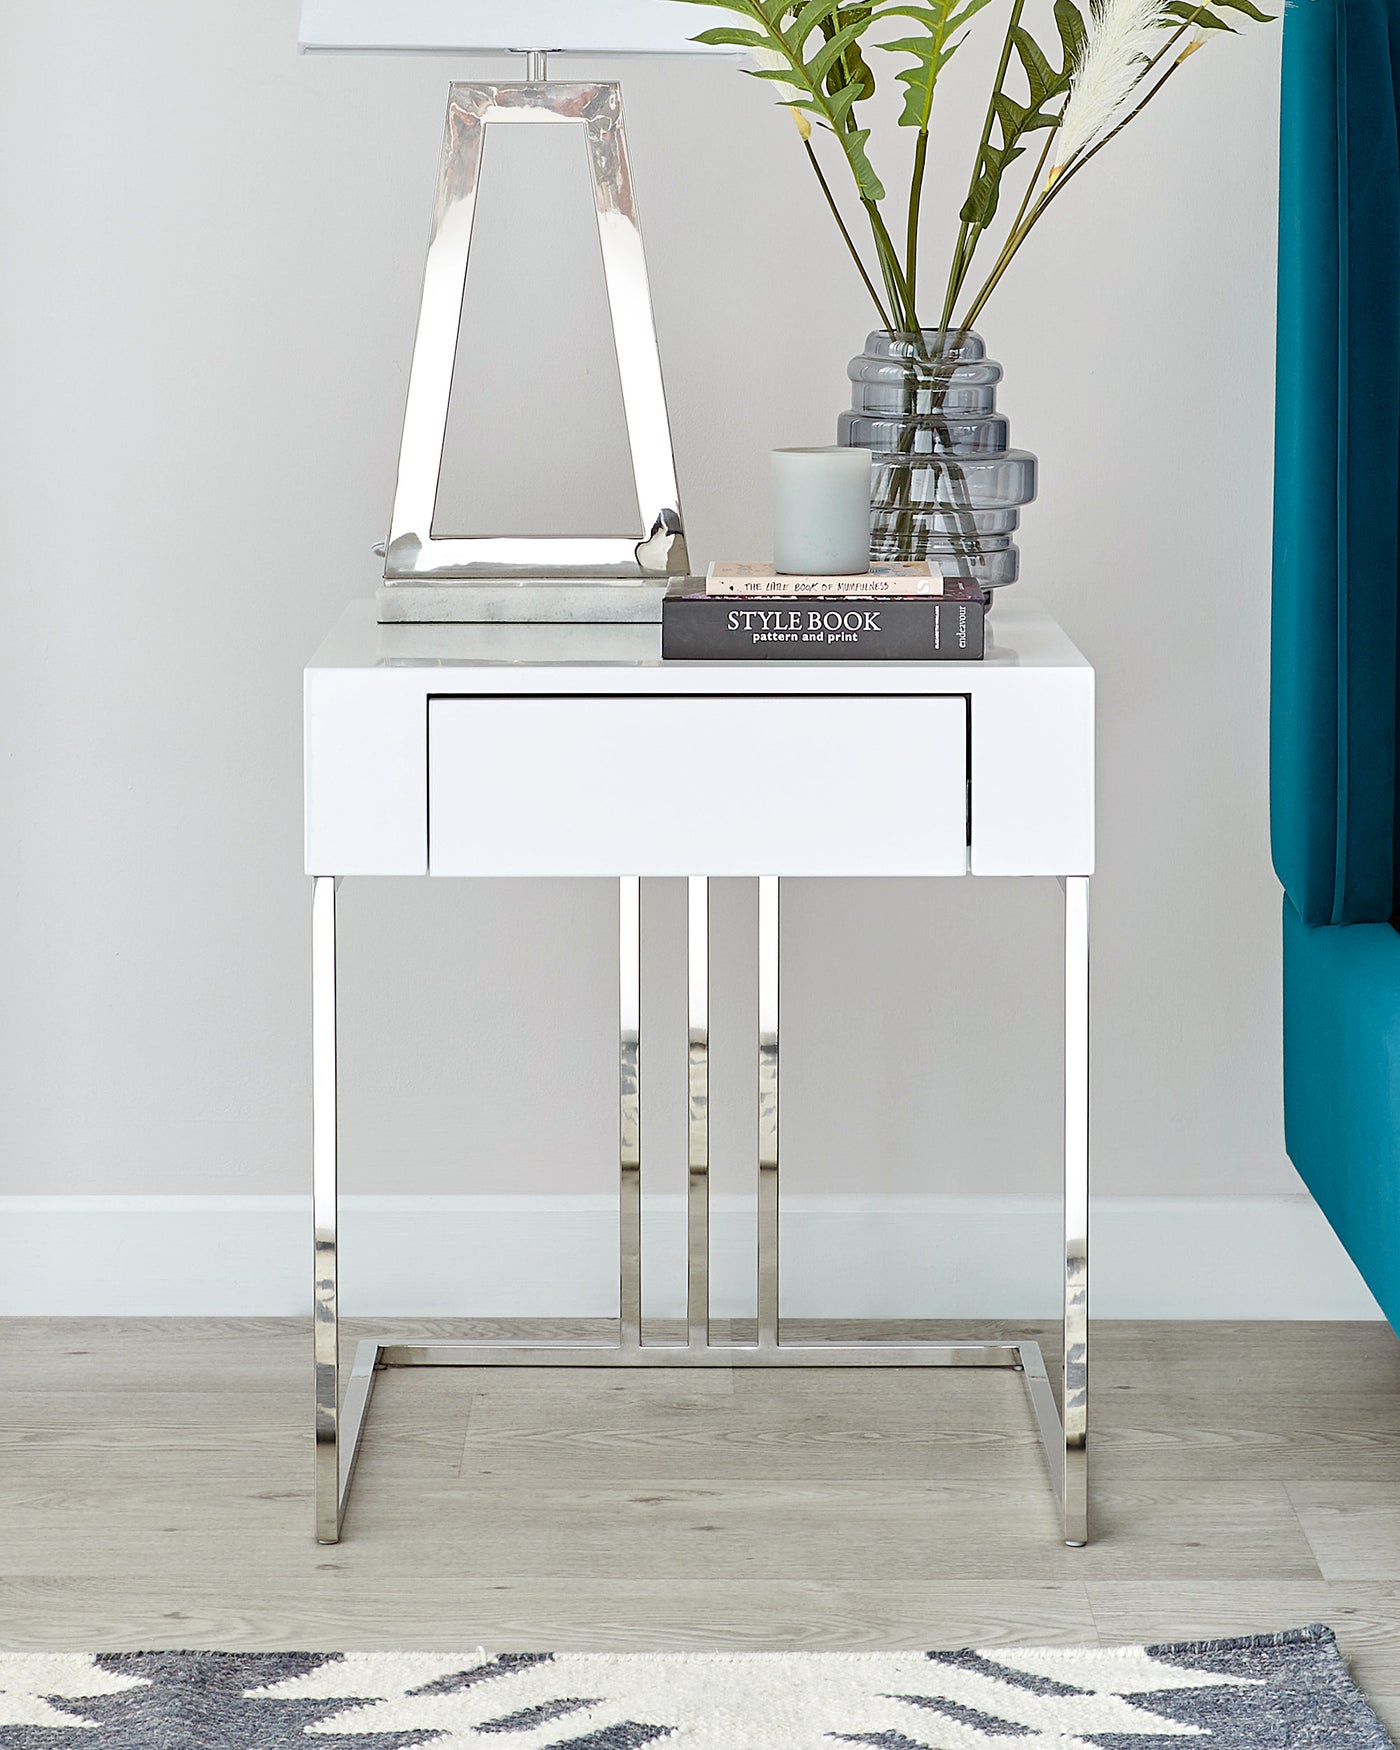 Modern white console table with a sleek design, featuring a glossy finish, one drawer with a silver handle, and slim stainless steel legs in a minimalist style.